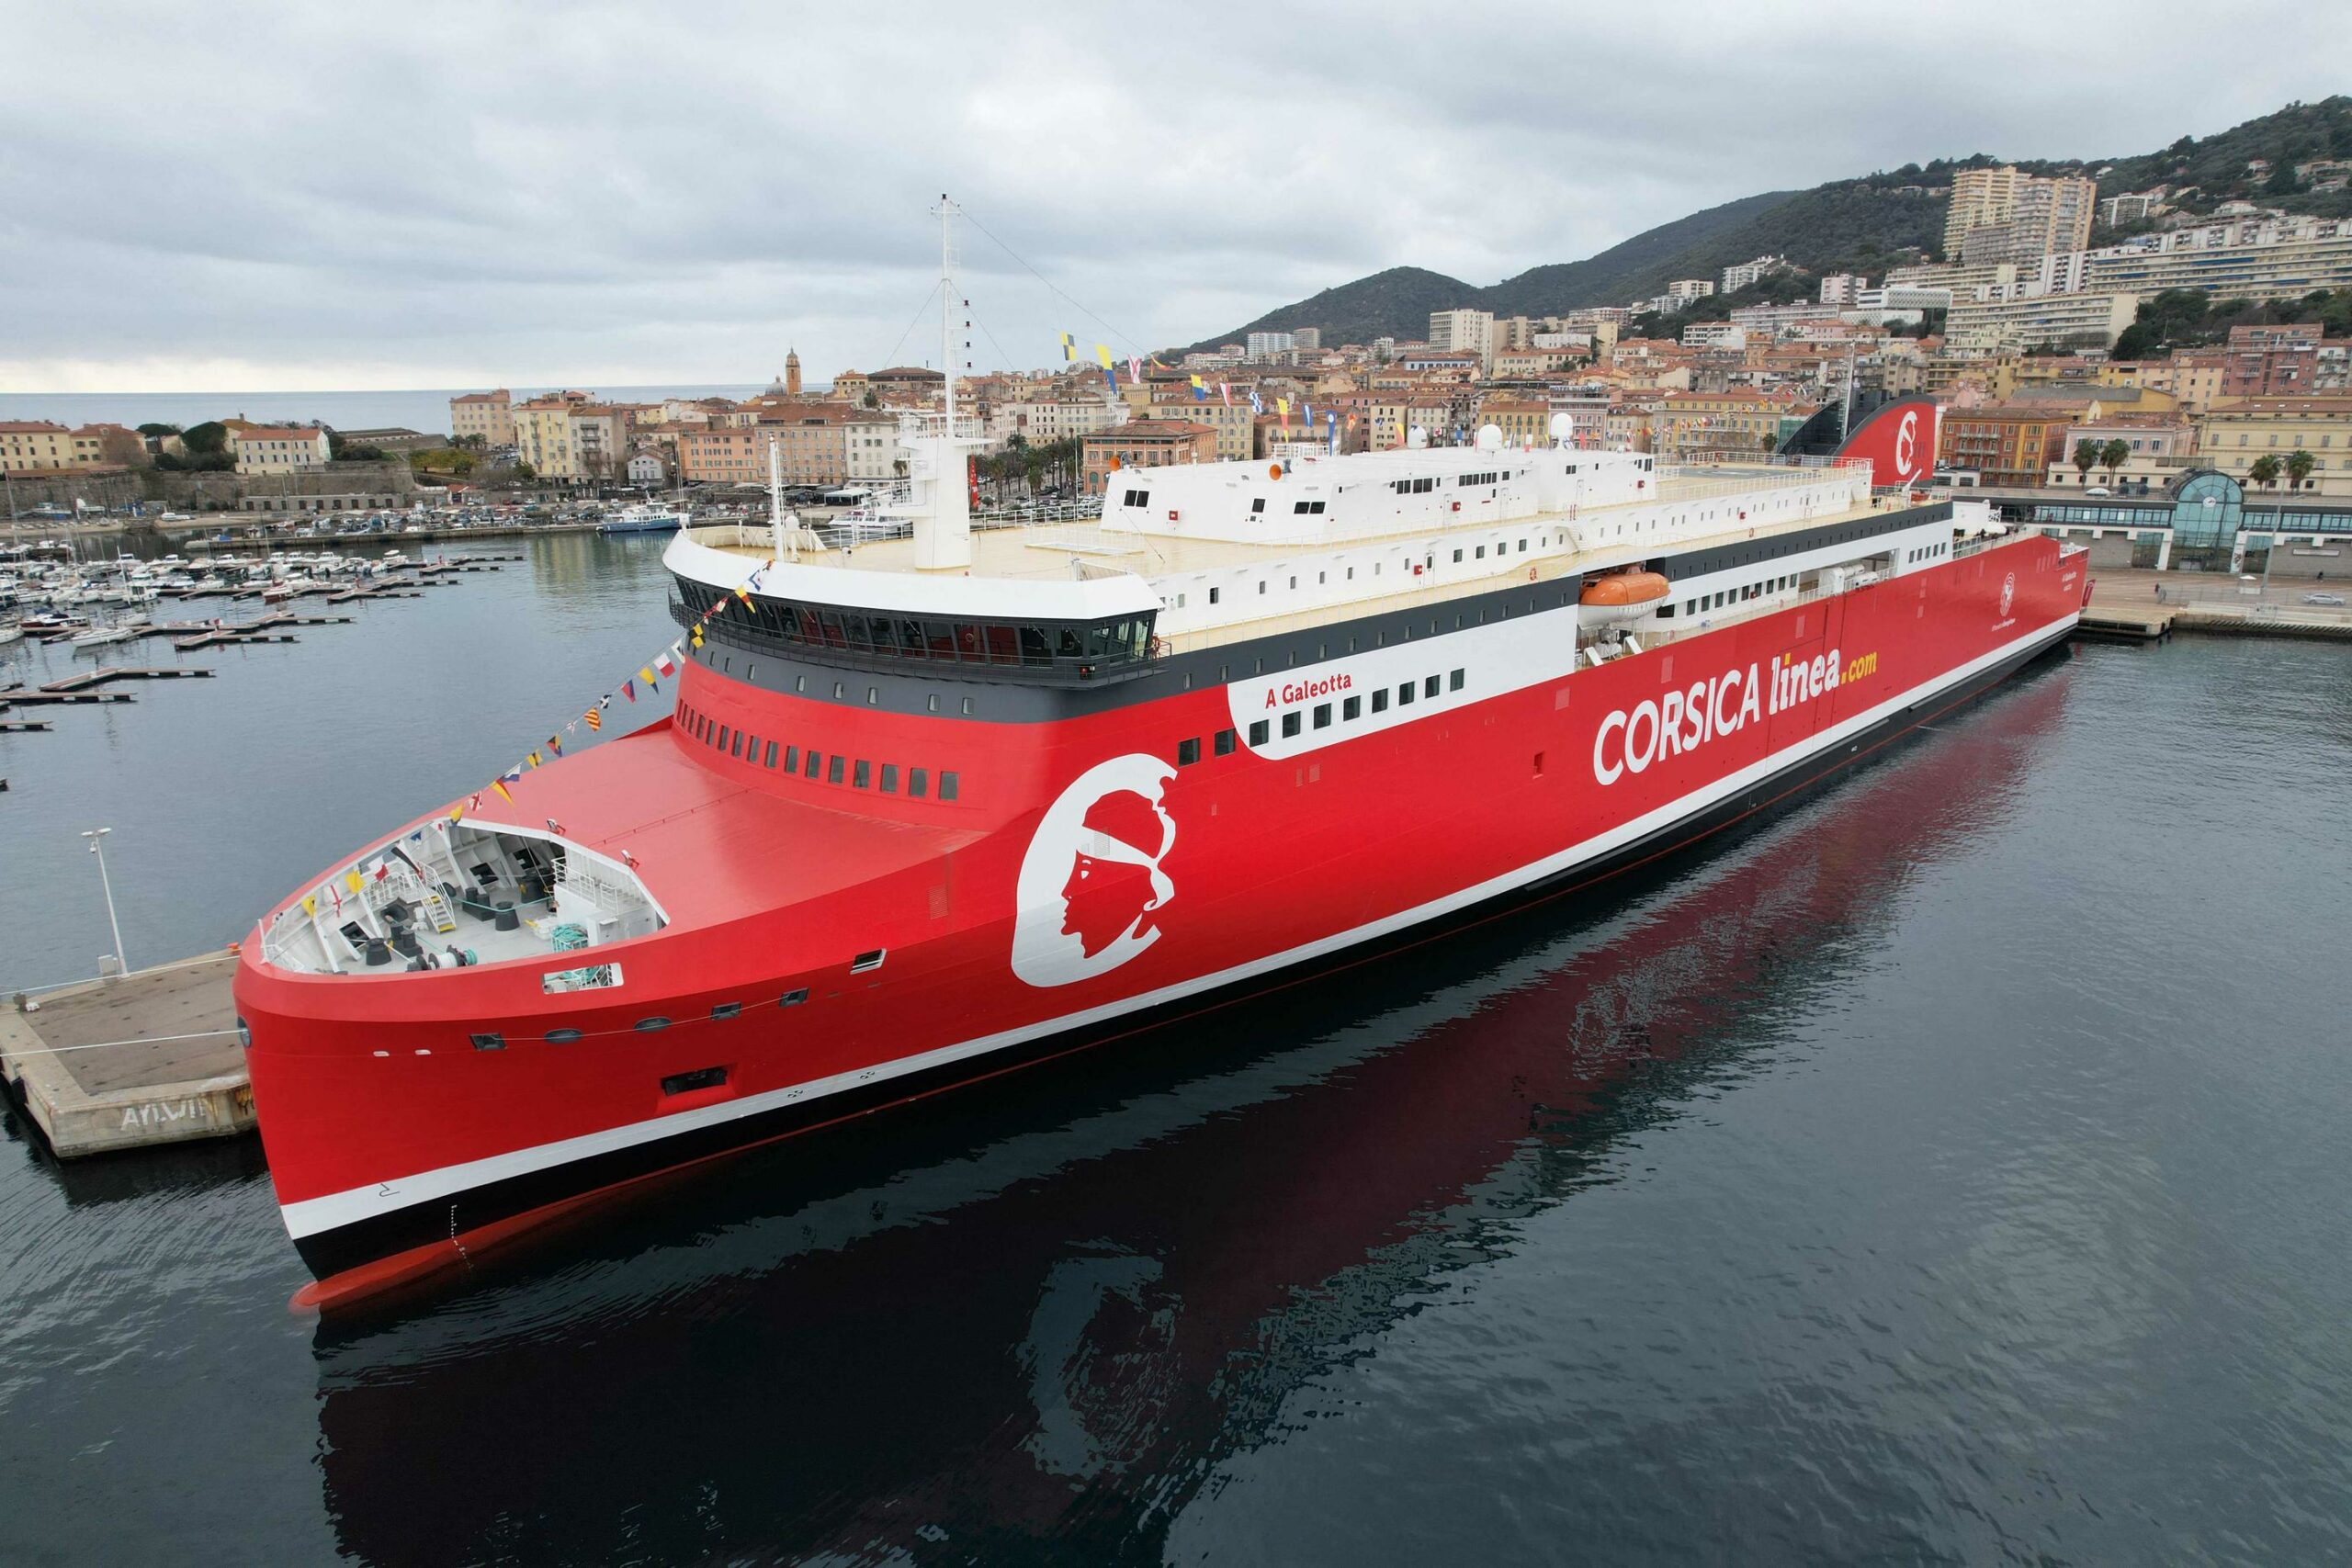 An aerial photograph taken on January 5, 2023 shows the brand new Corsica Linea ferry company boat A Galeotta during its inauguration at the commercial port of Ajaccio on the French Mediterraenan island of Corsica. - The new Corsica Linea ferry A Galeotta is the first liquefied natural gas vessel to serve Corsica. (Photo by Pascal POCHARD-CASABIANCA / AFP)